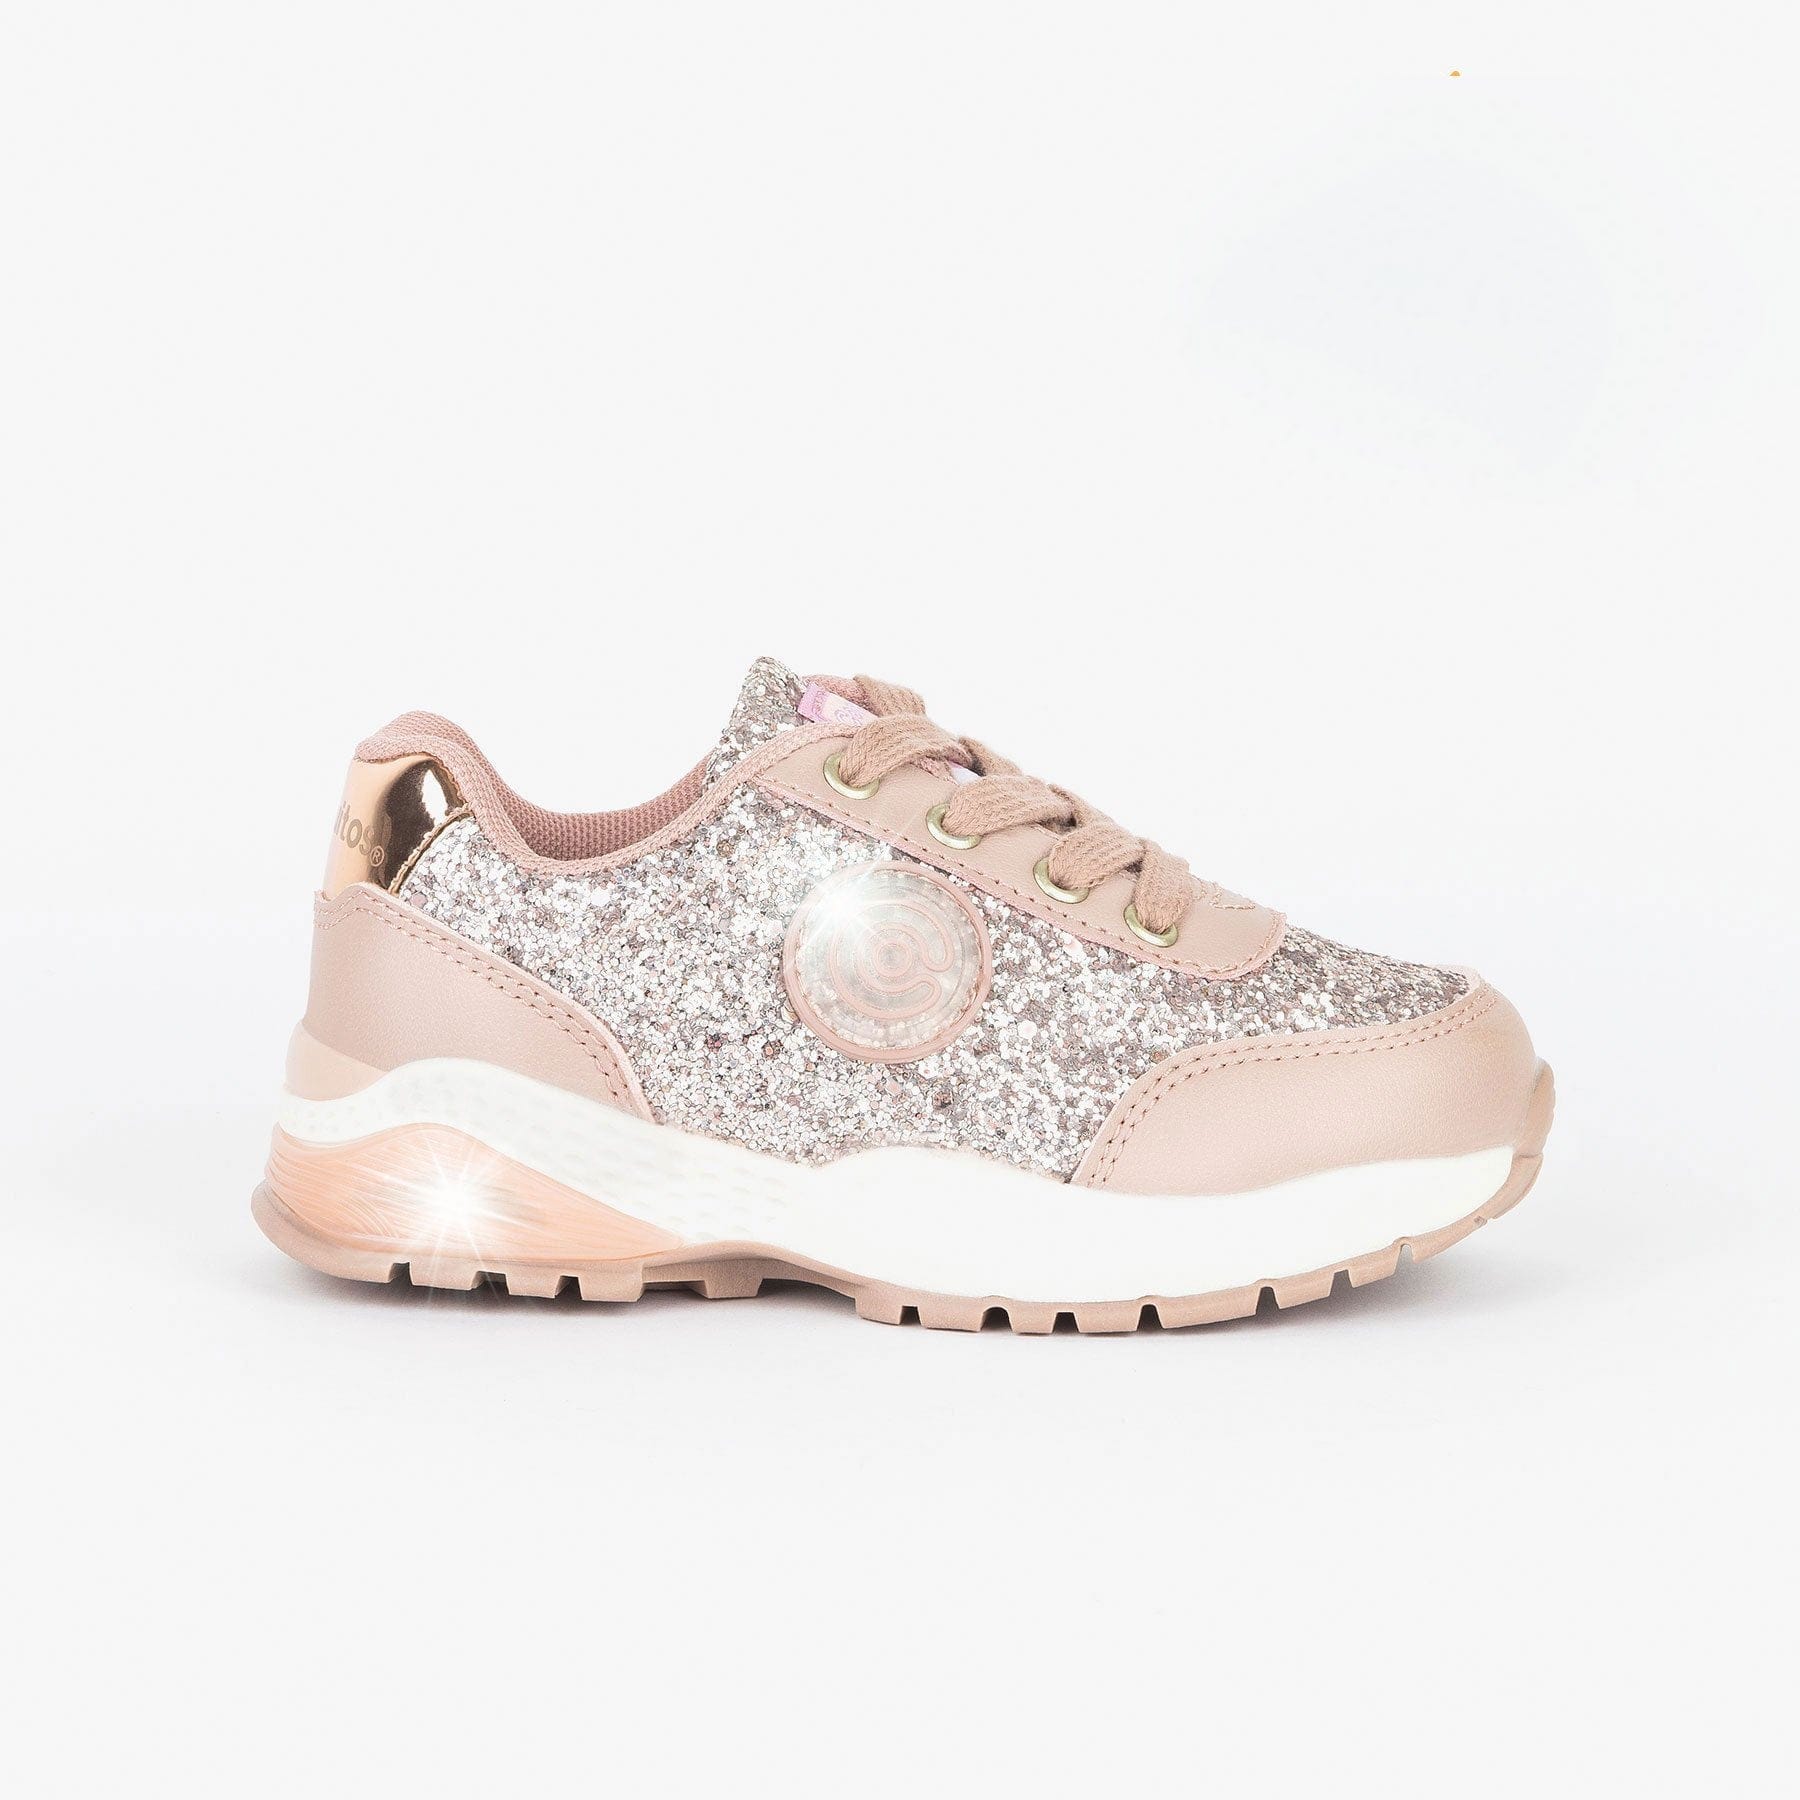 CONGUITOS Shoes Girl's Pink Glitter Sneakers with Lights